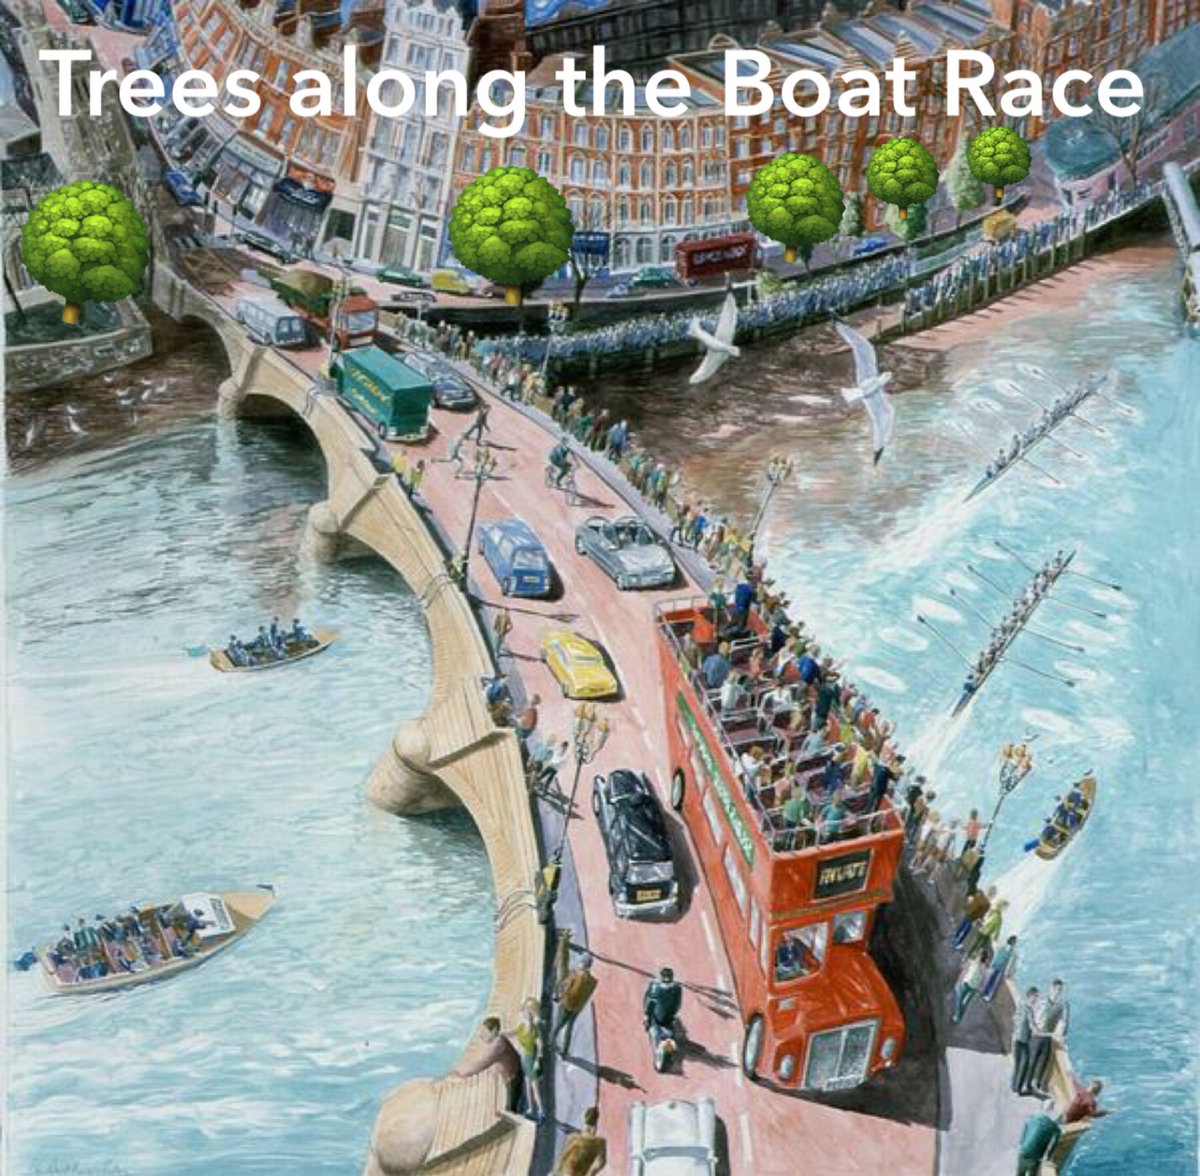 Here’s a thread about the #trees along The Boat Race Course @theboatrace ⬇️